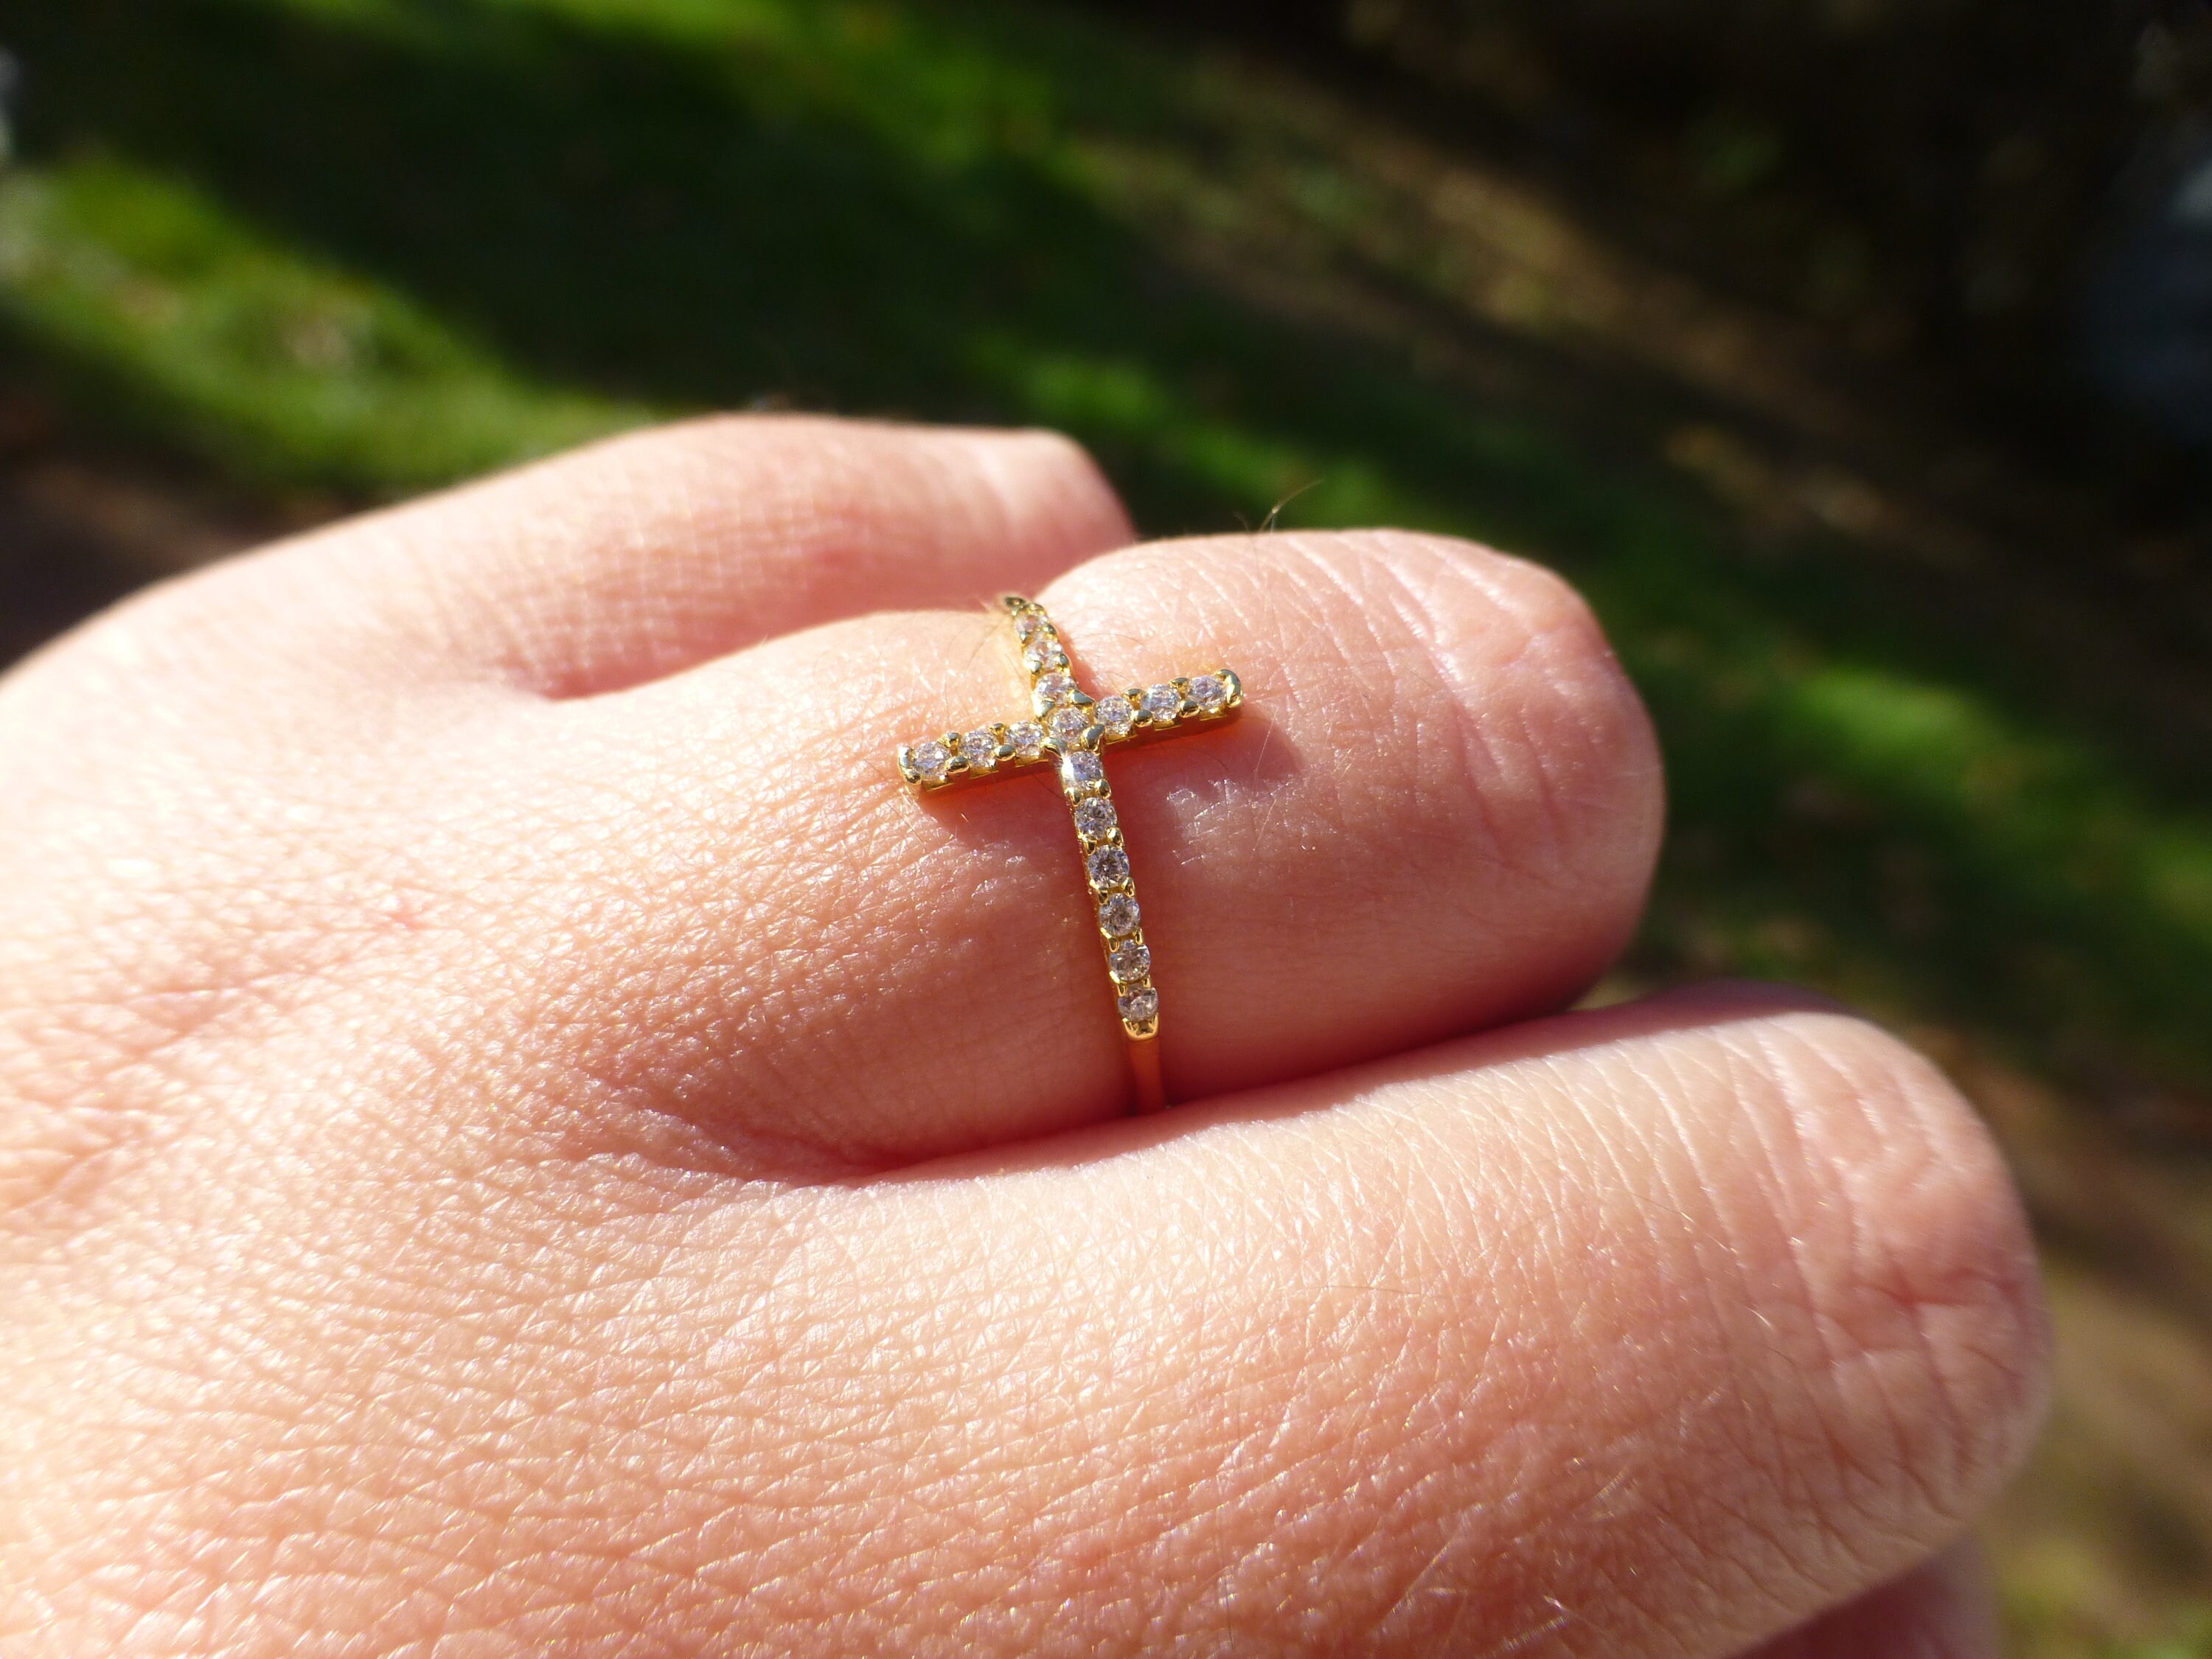 Vintage Solid 14k Gold Diamond Cross Band Ring, Stunning Ring of Faith,  Size 7.5, Everyday Piece, WOW - Etsy